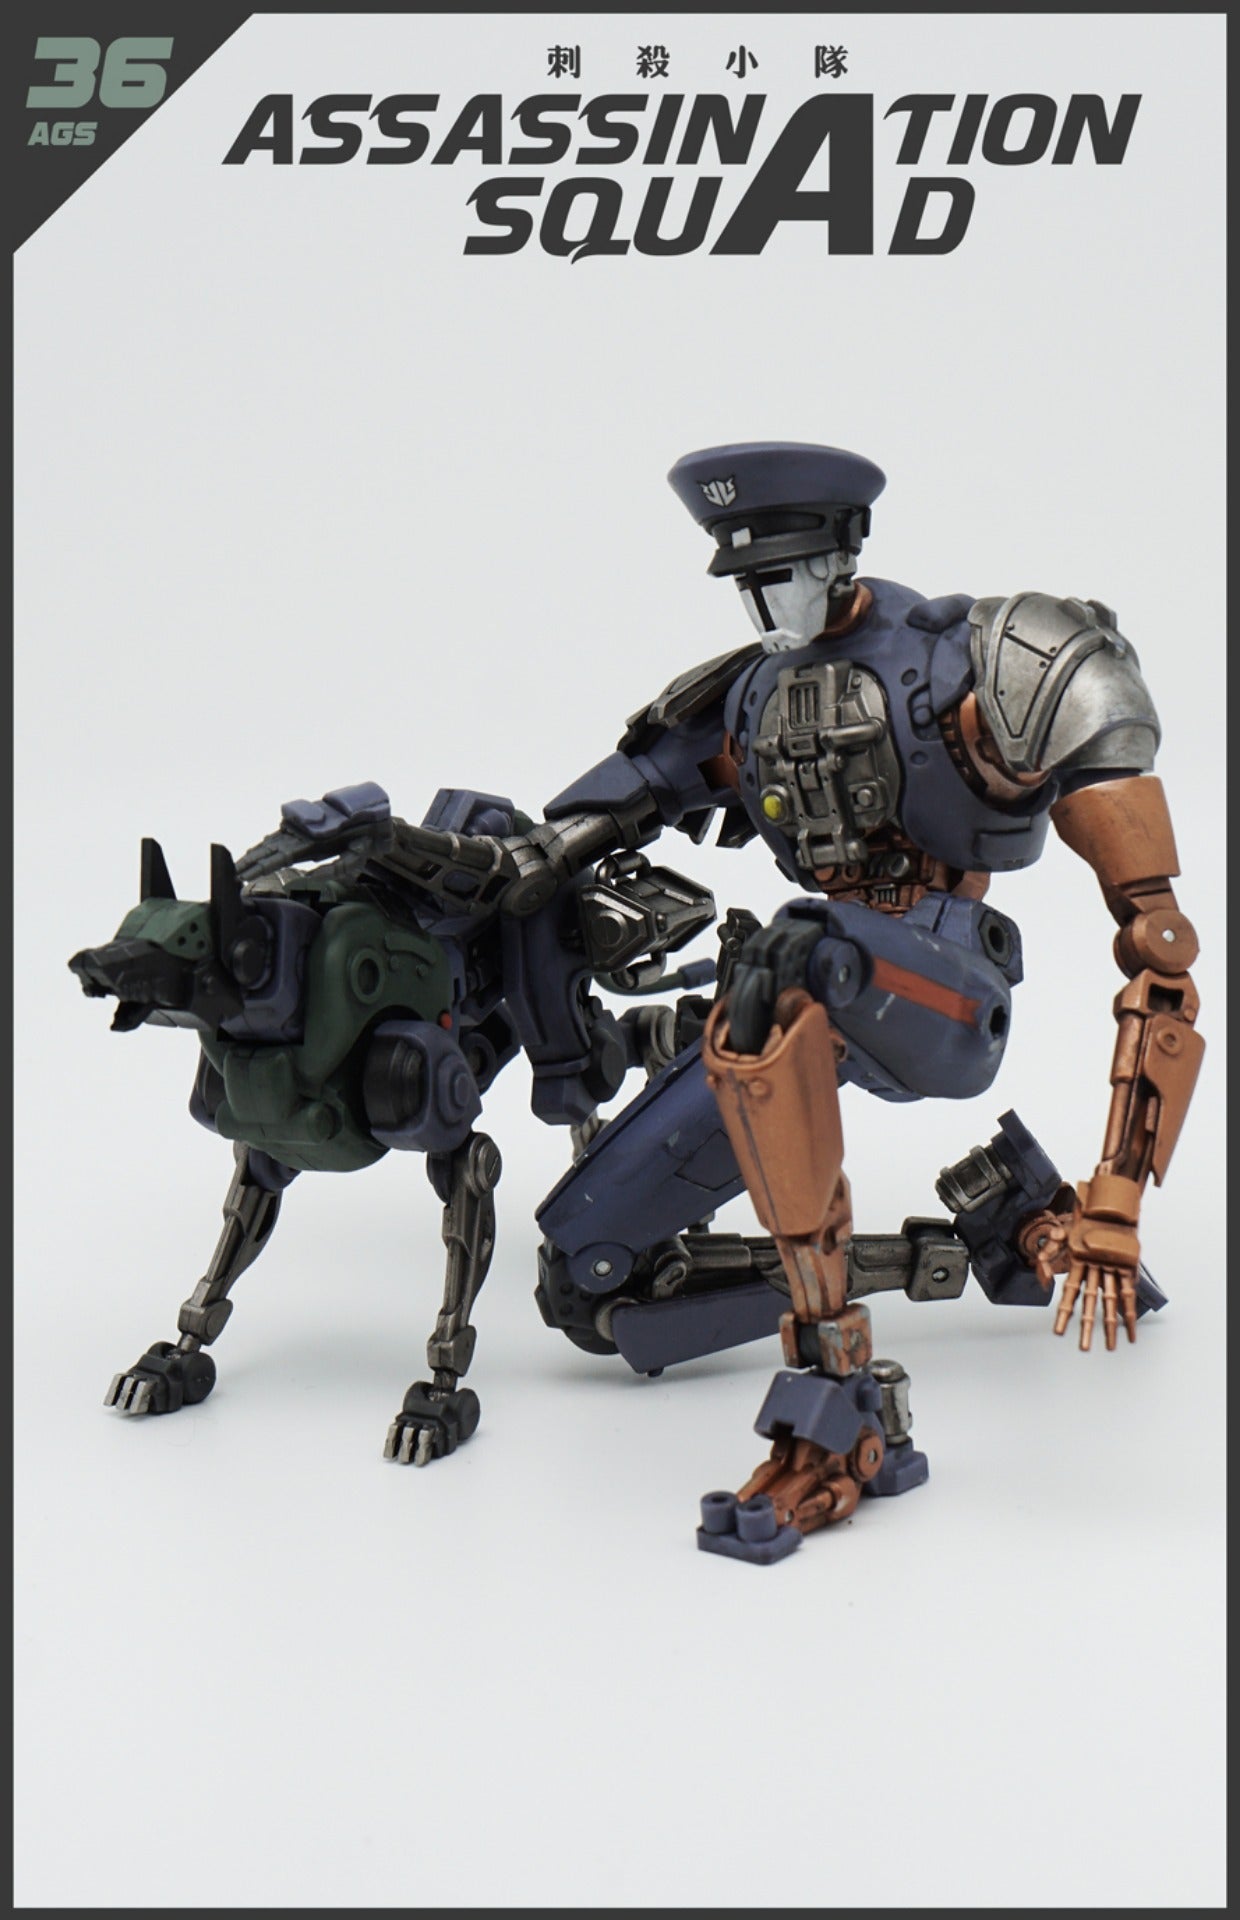 A new generation of 1/12 superalloy mecha by ToysComic! This Forging Soul AGS-36 Assassination Commander Youling comes armed with various weapons and accessories as well as a companion mecha dog.